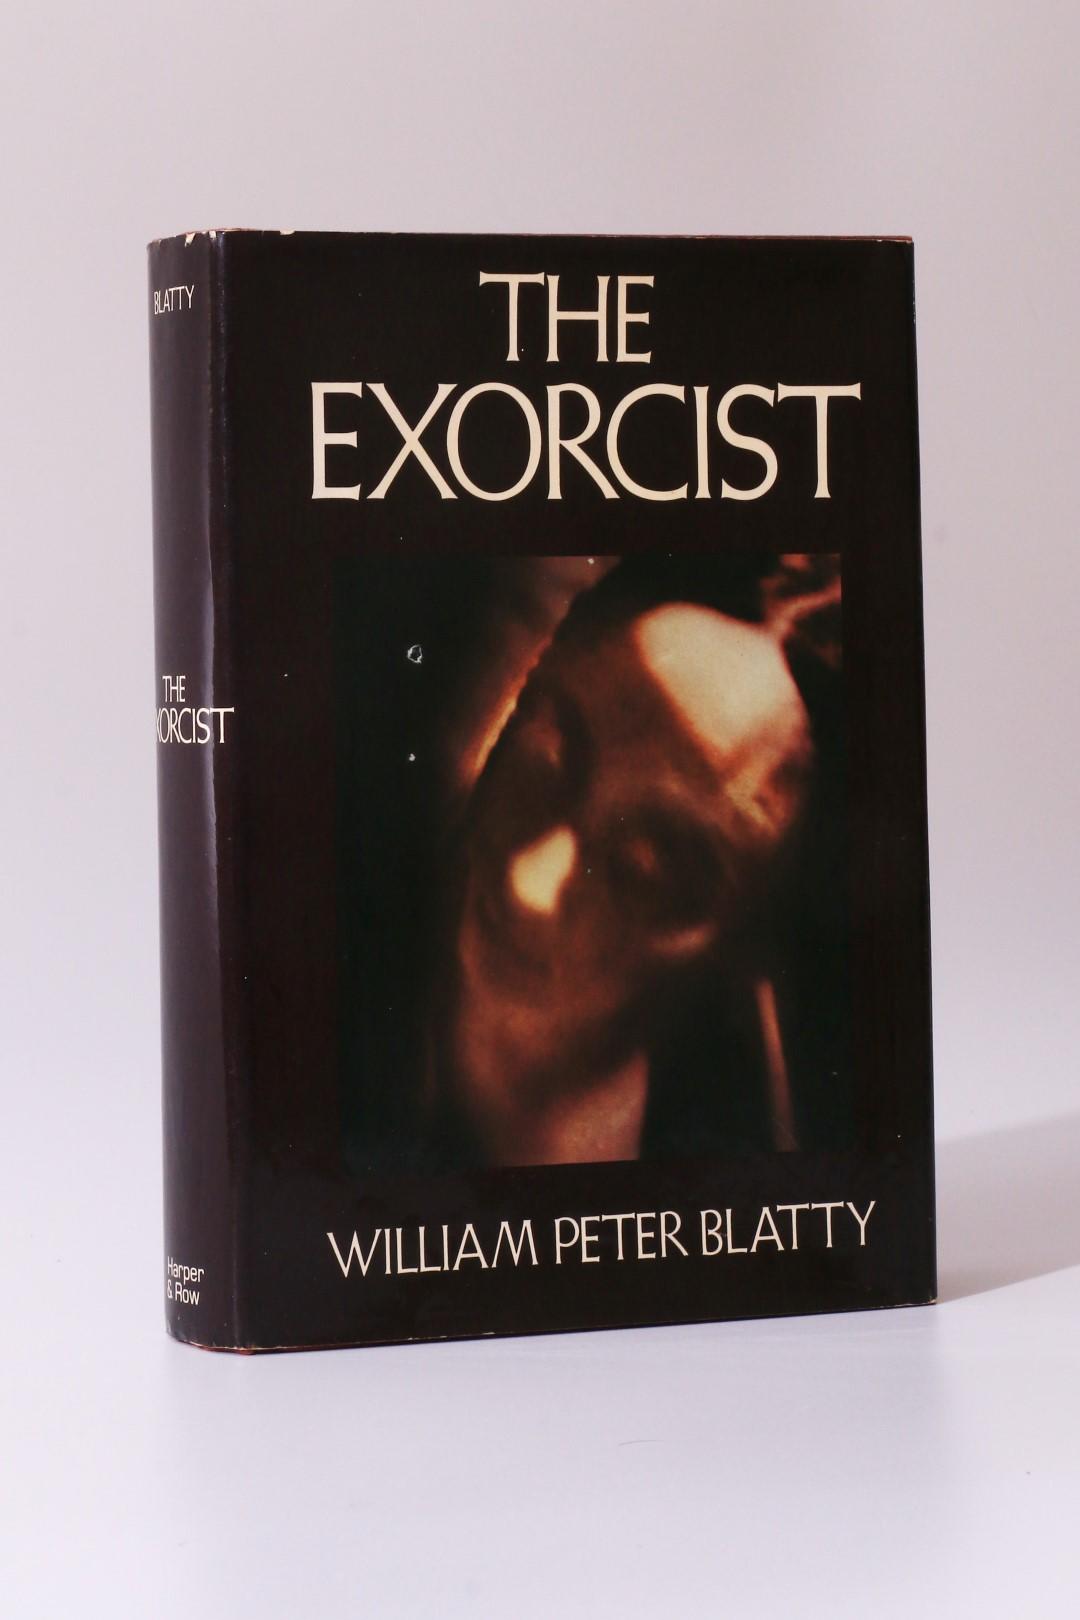 William Peter Blatty - The Exorcist - Harper and Row, 1971, First Edition.